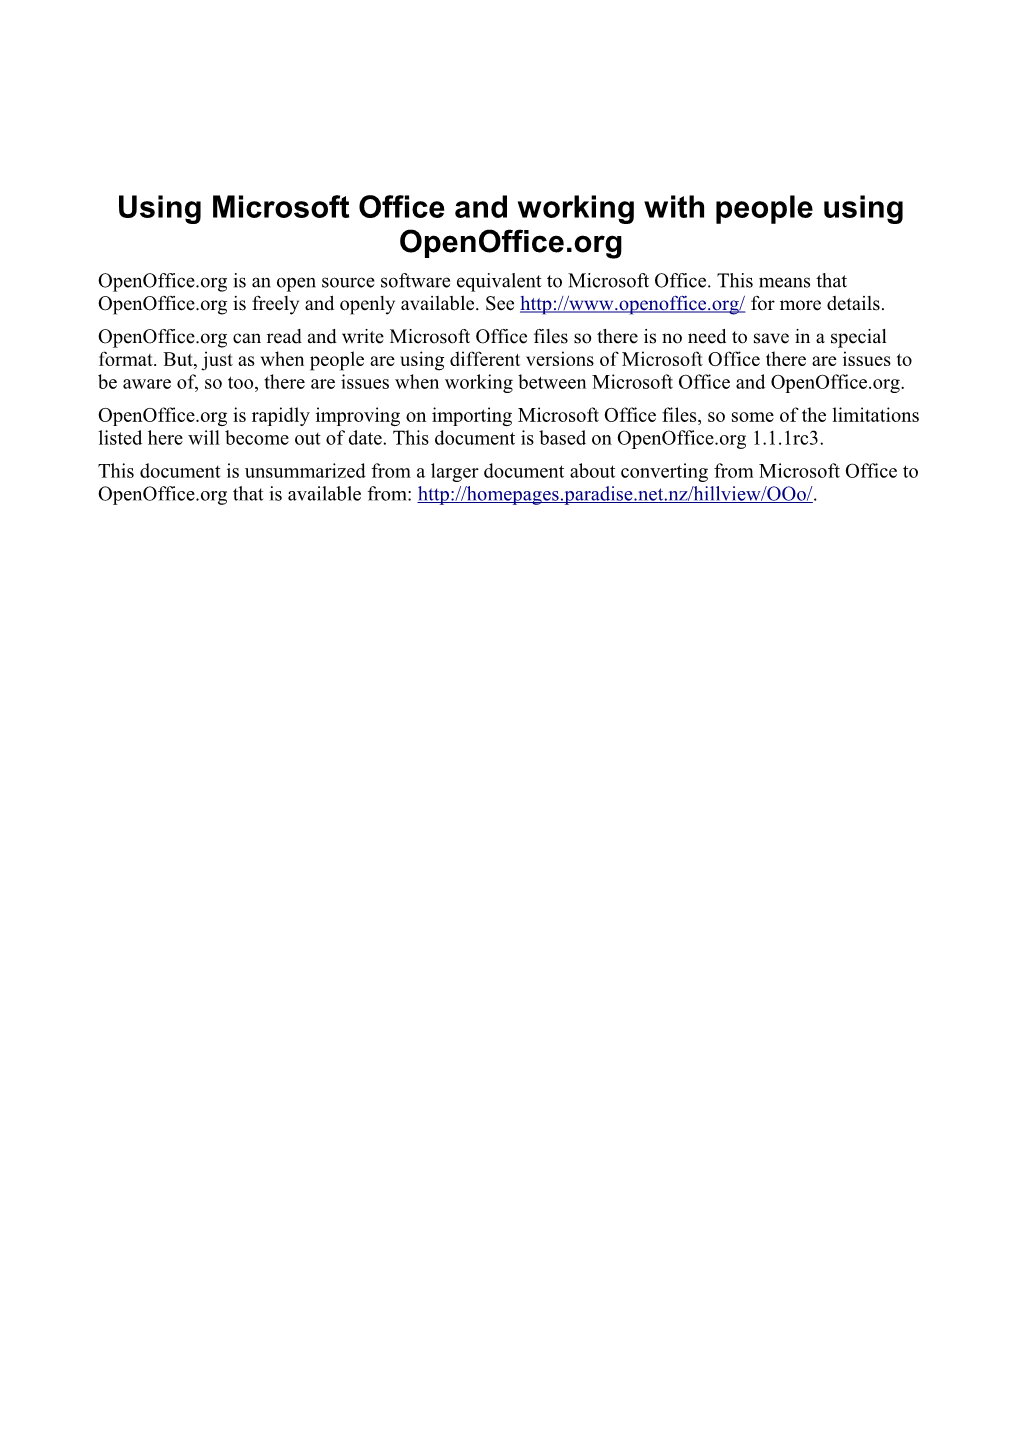 Using Microsoft Office and Working with People Using Openoffice.Org